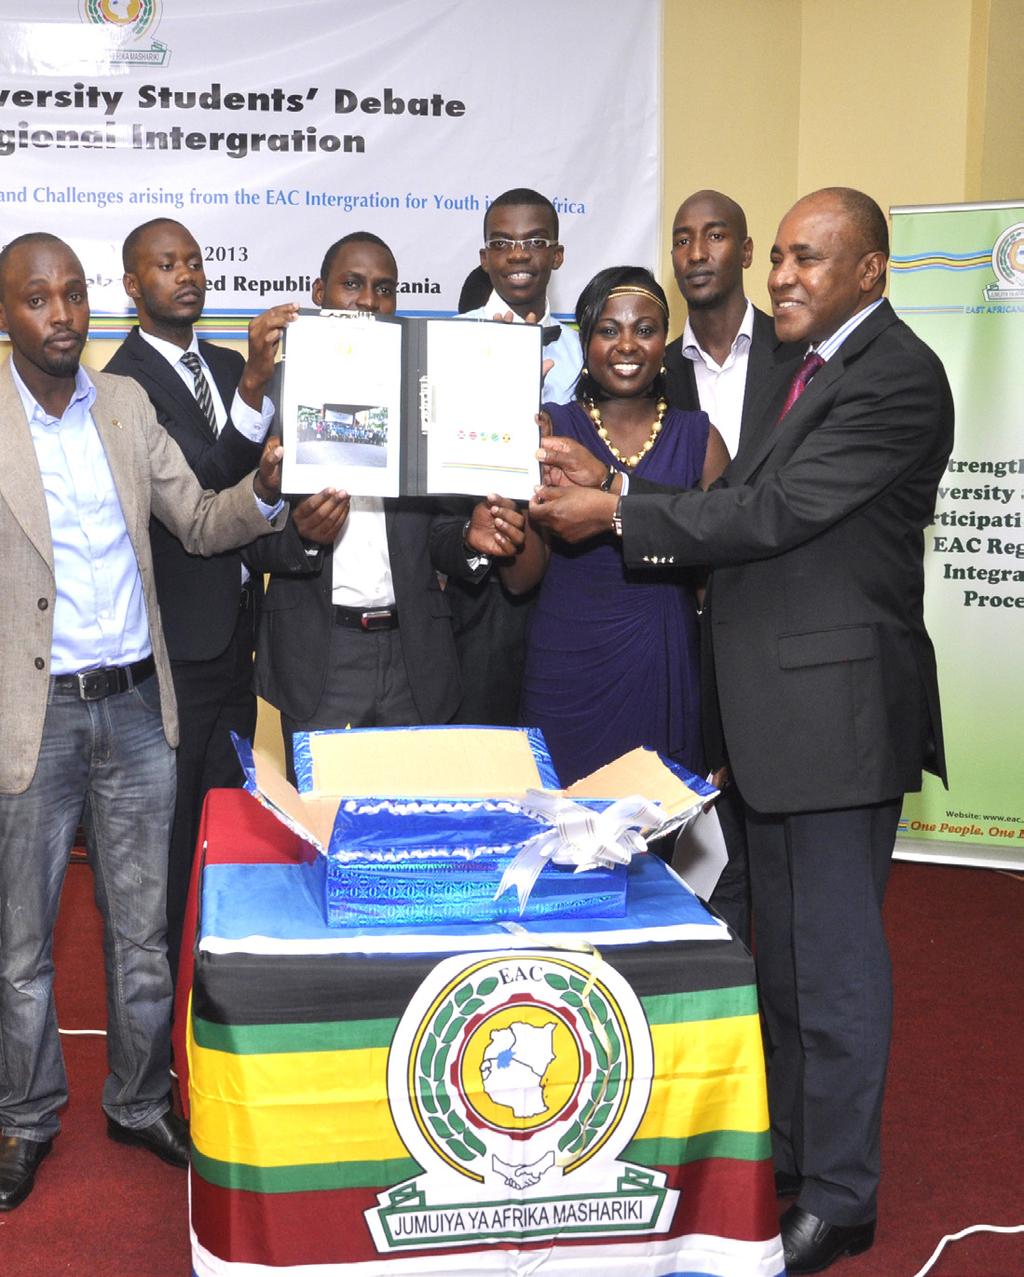 'The East African Community Youth Ambassadors' Platform seeks to empower young people to participate actively in society, to improve their own lives, to advocate for their own interests and to tell